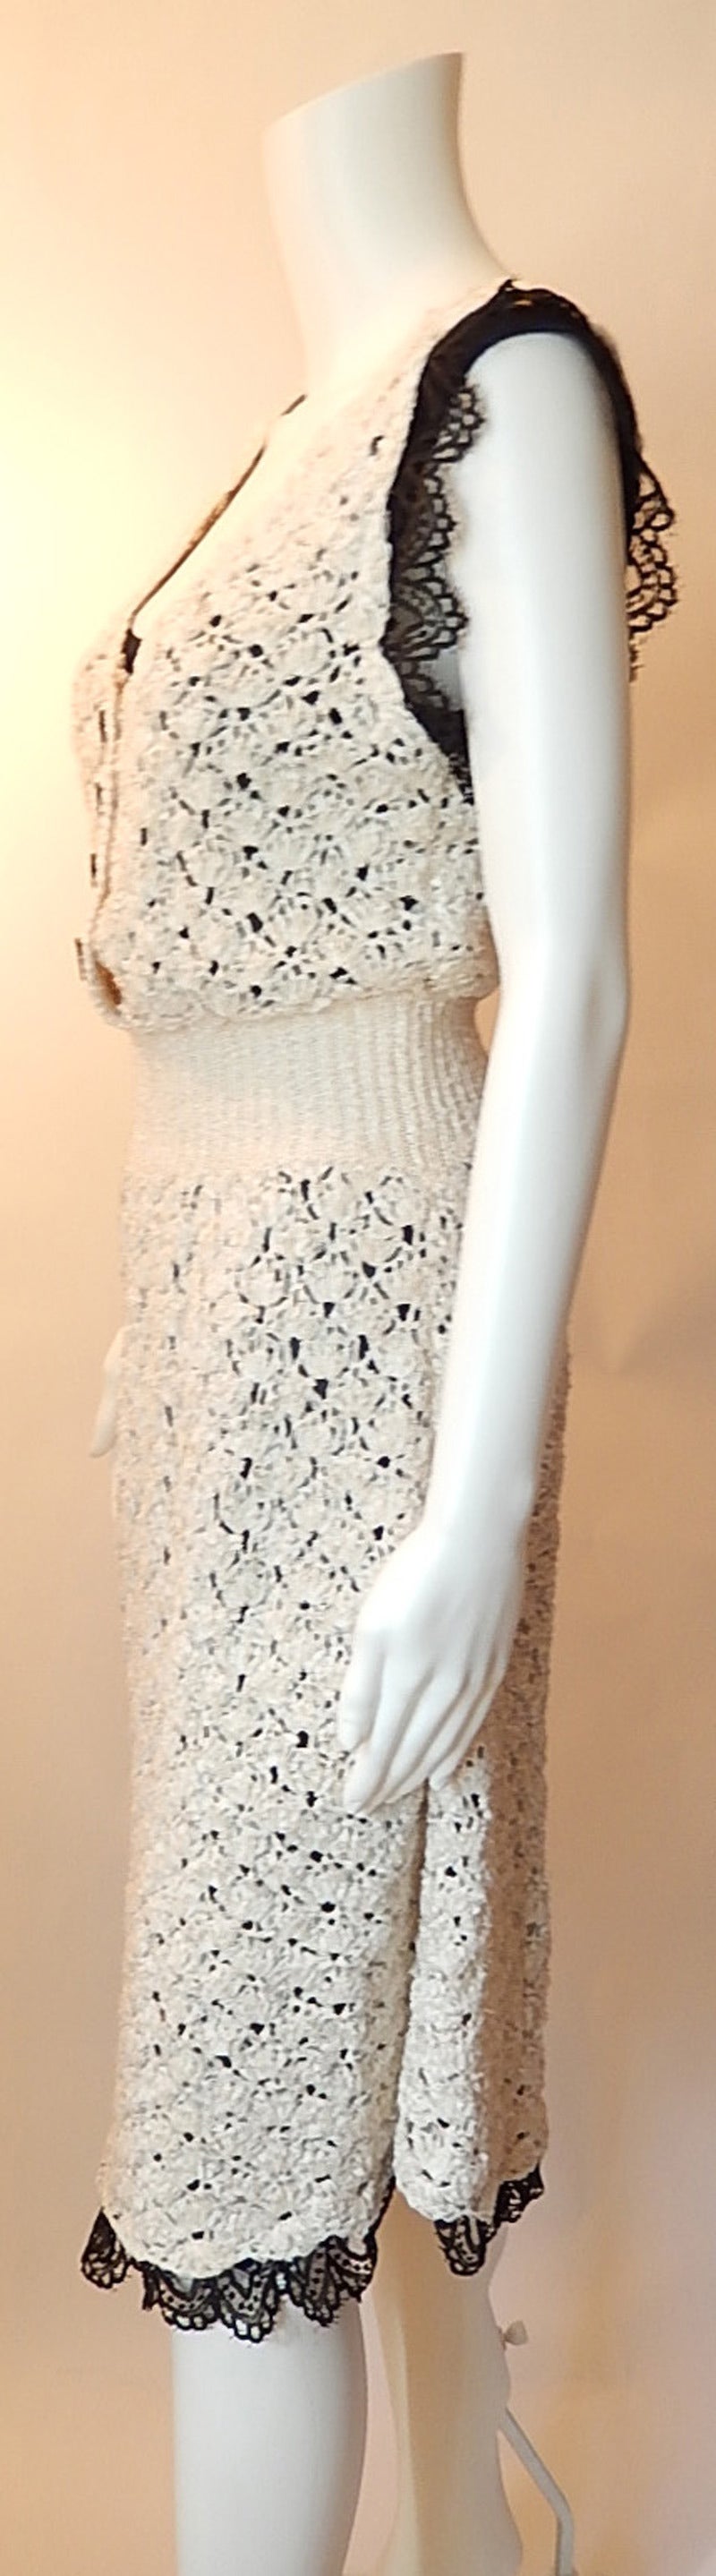 Women's Chanel Ivory Silk Crocheted Dress with Black Slip Lace Edged Size 40 For Sale